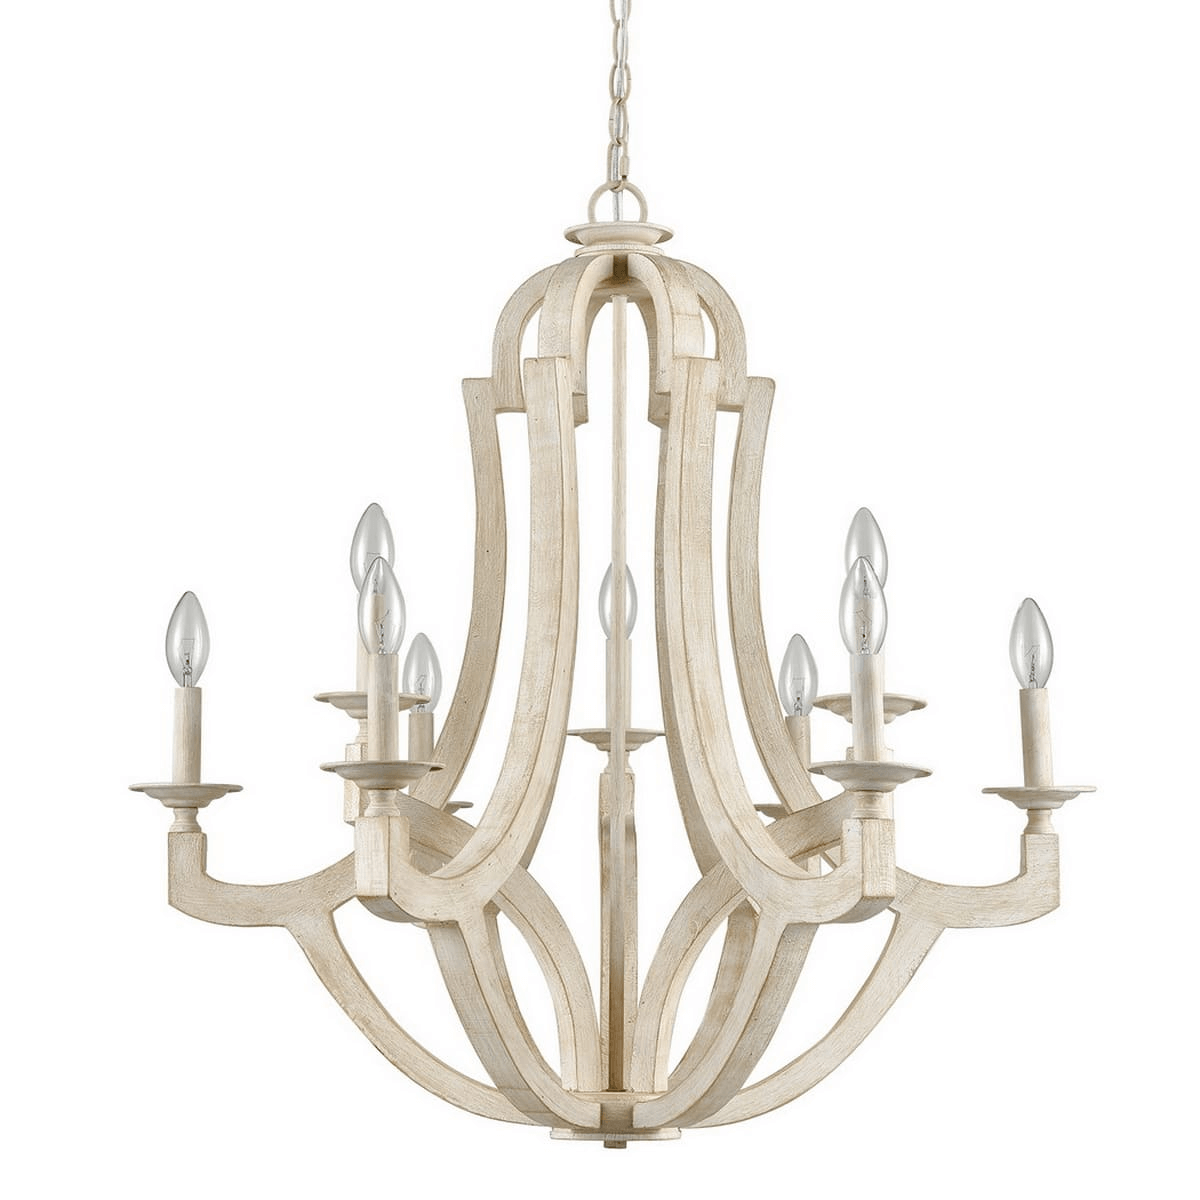 Distressed French-inspired Wooden Chandelier